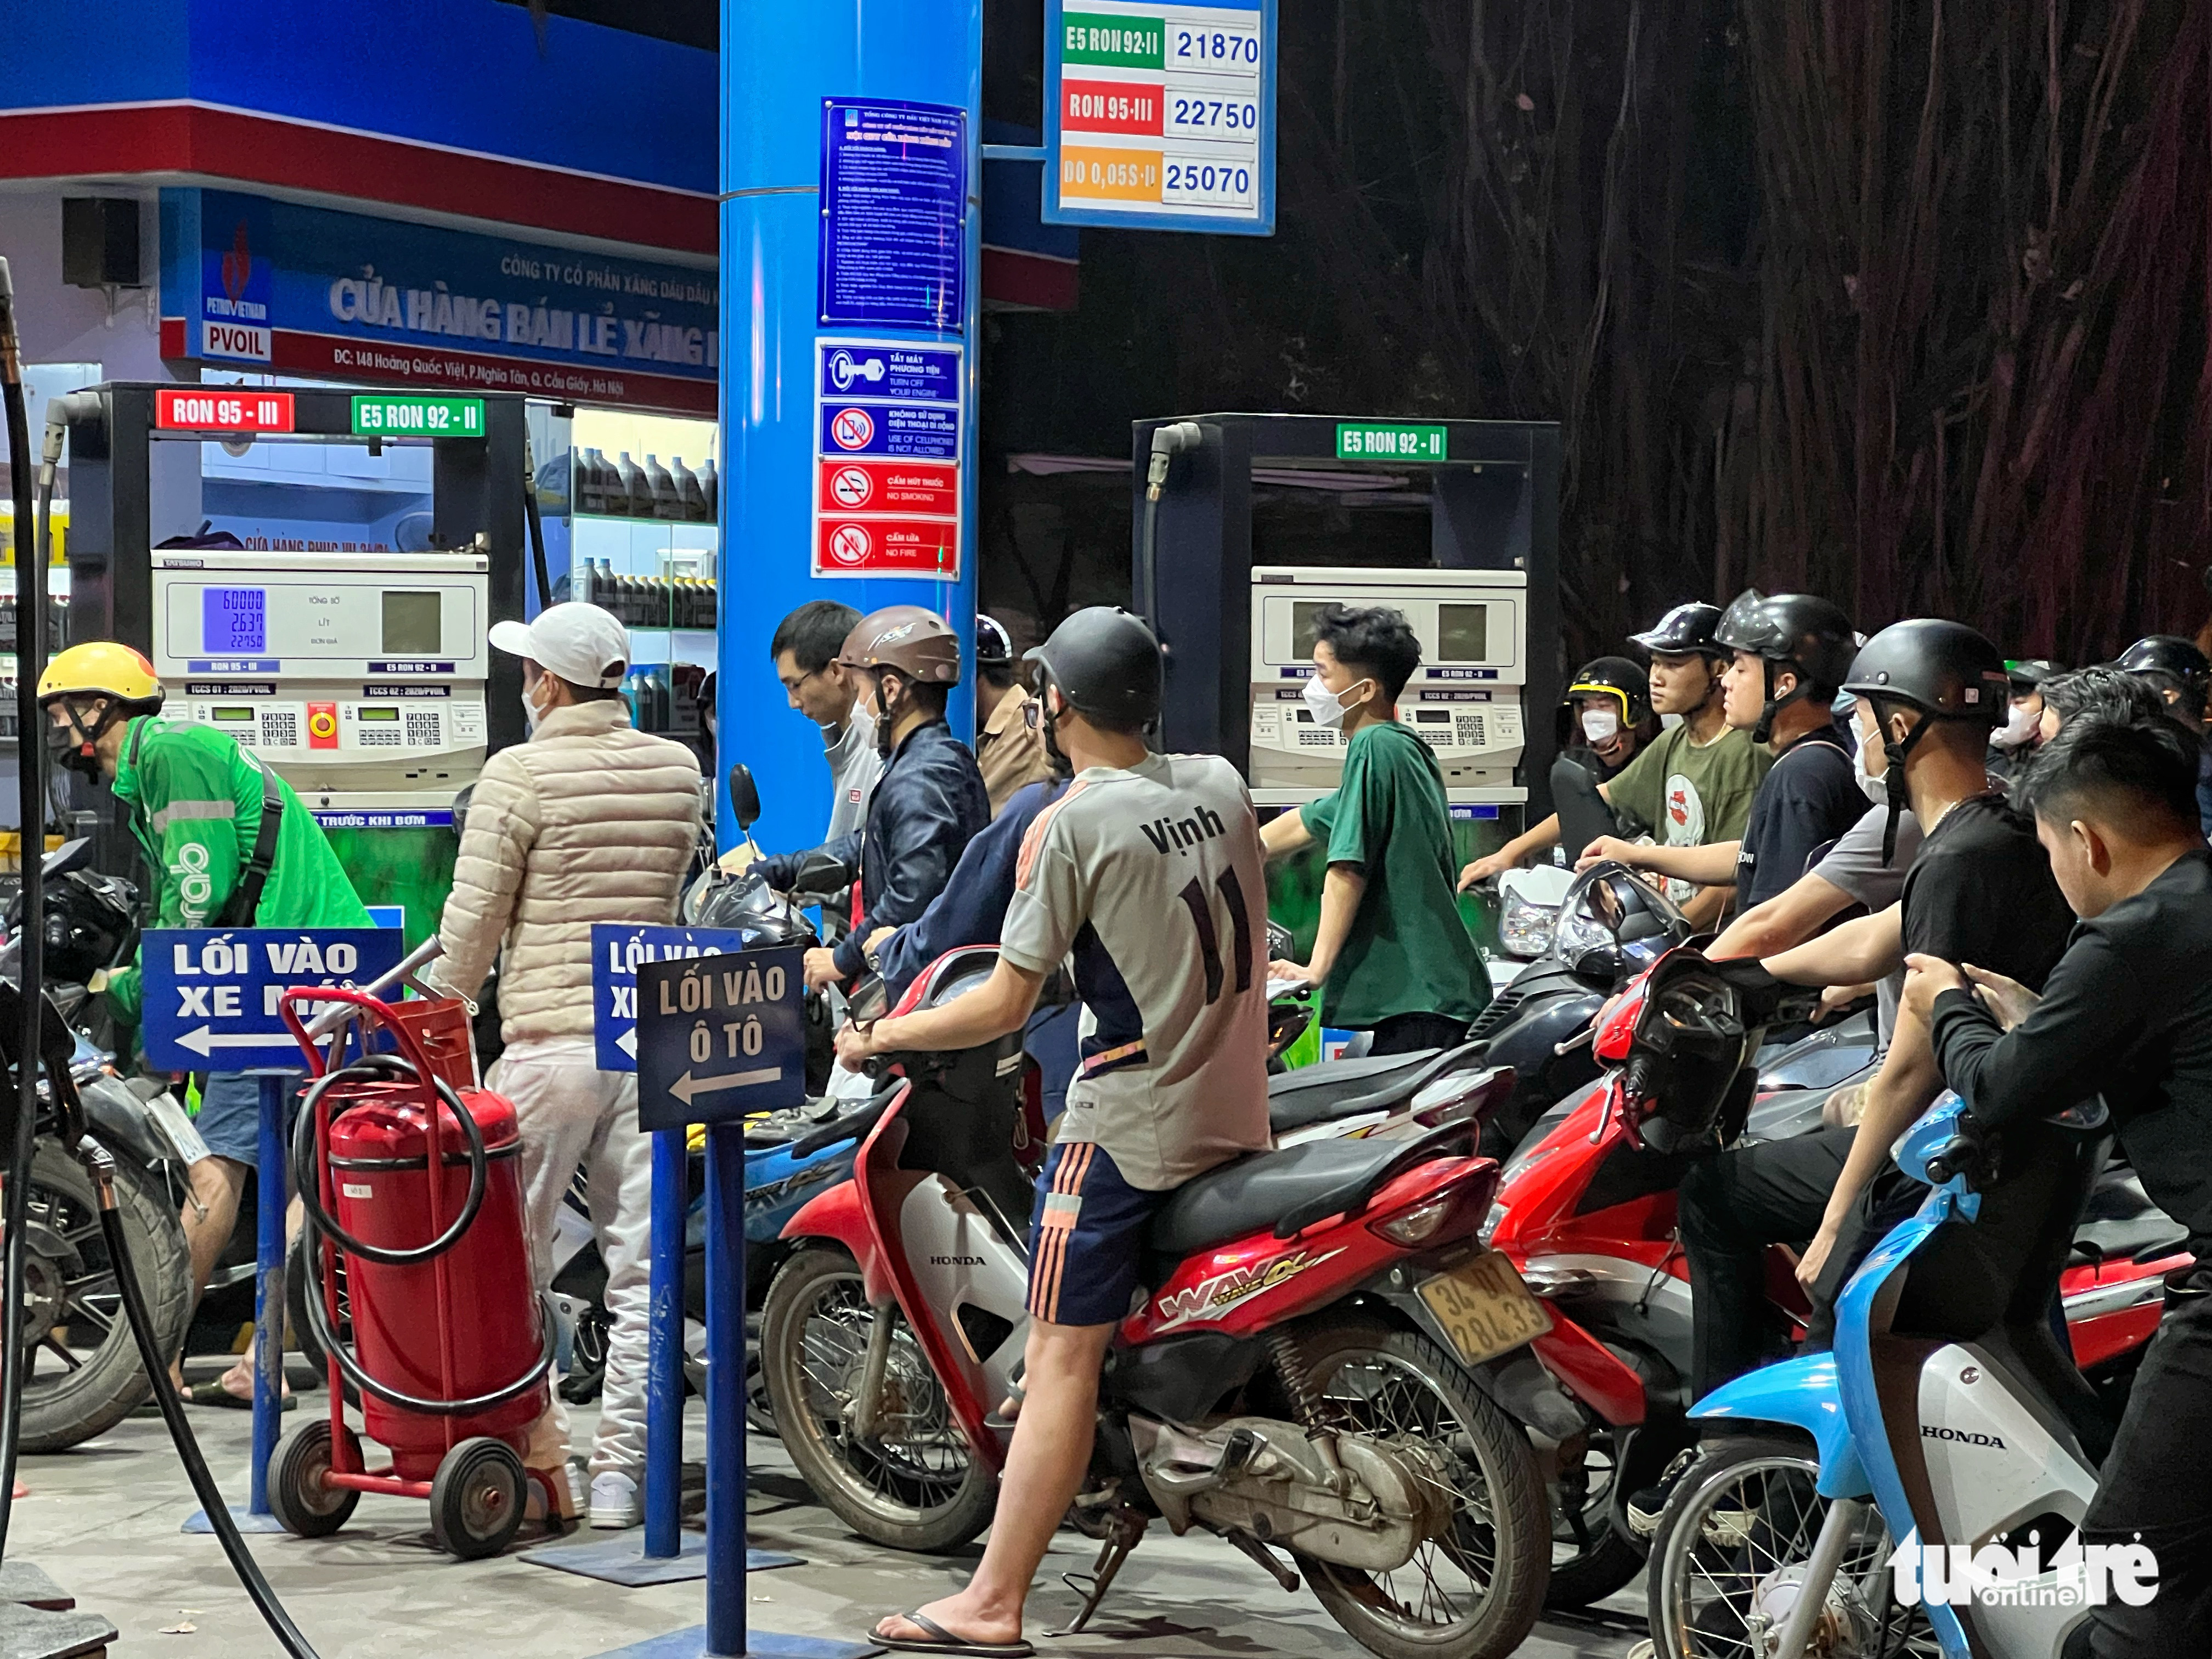 People wait to buy gasoline at a filling station in Hanoi at 11:50 pm on November 10, 2022. Photo: Pham Tuan / Tuoi Tre